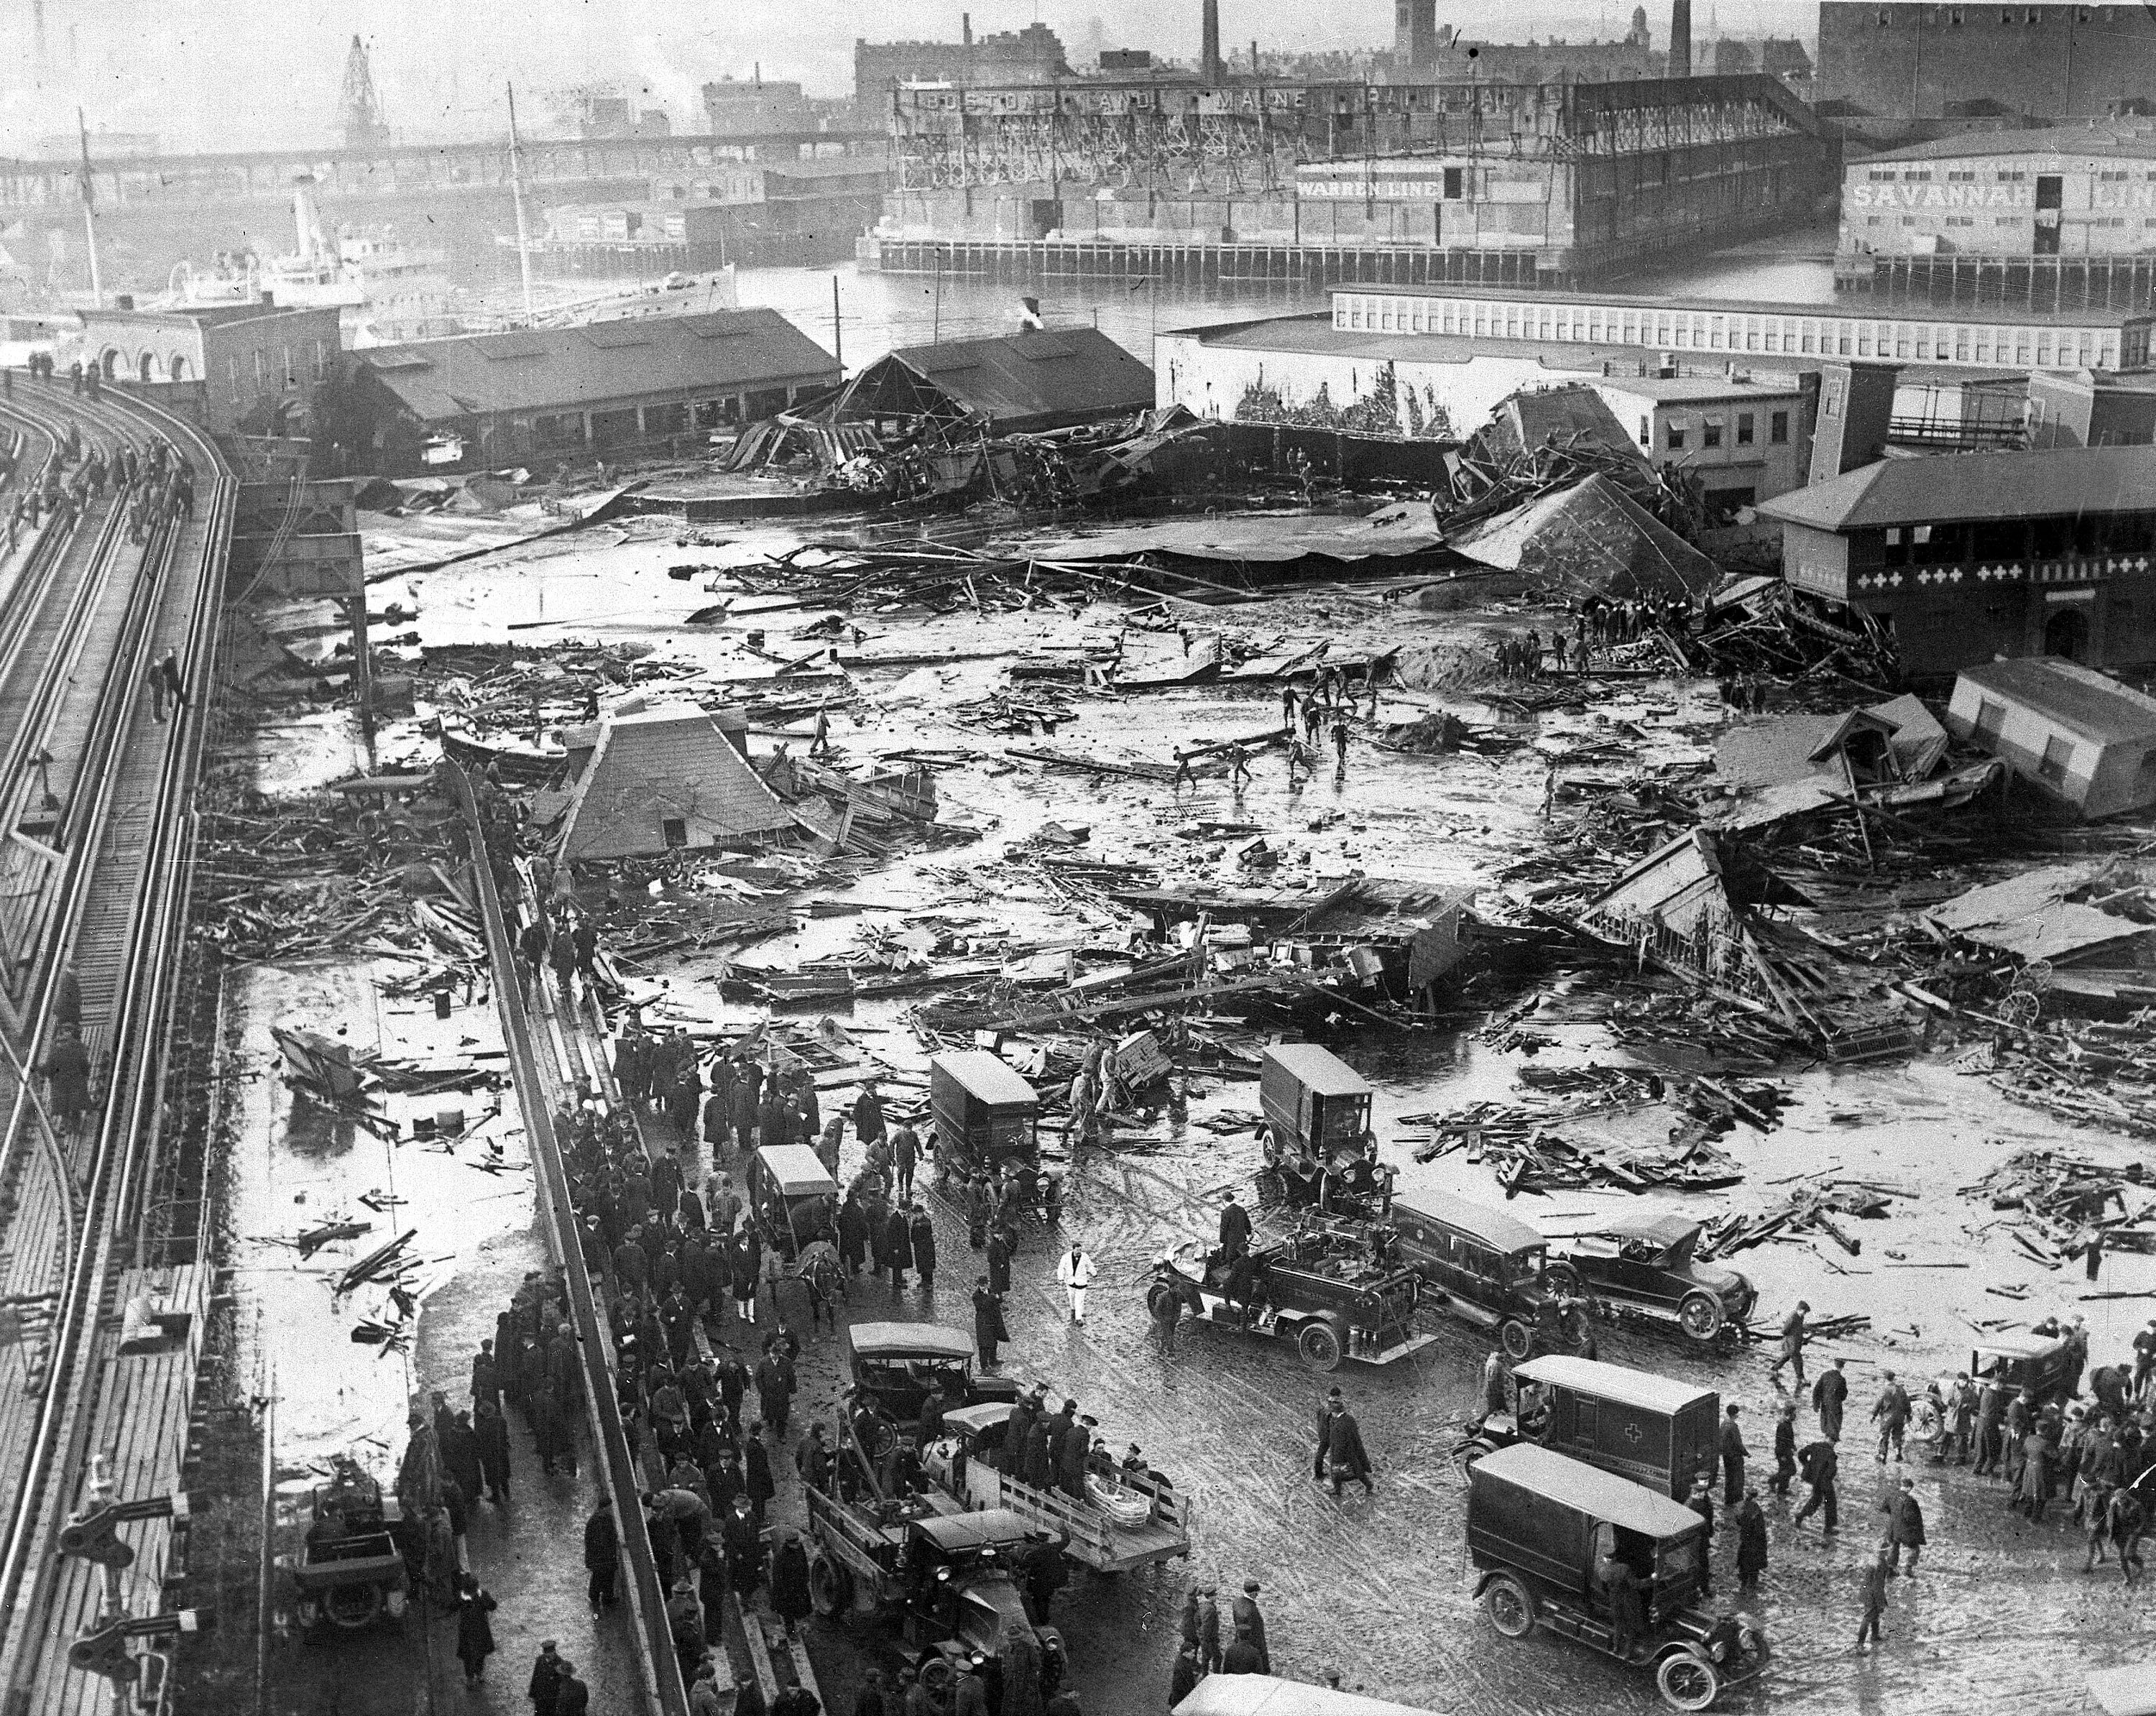 Northeastern Boston after the Great Molasses Flood of 1919.